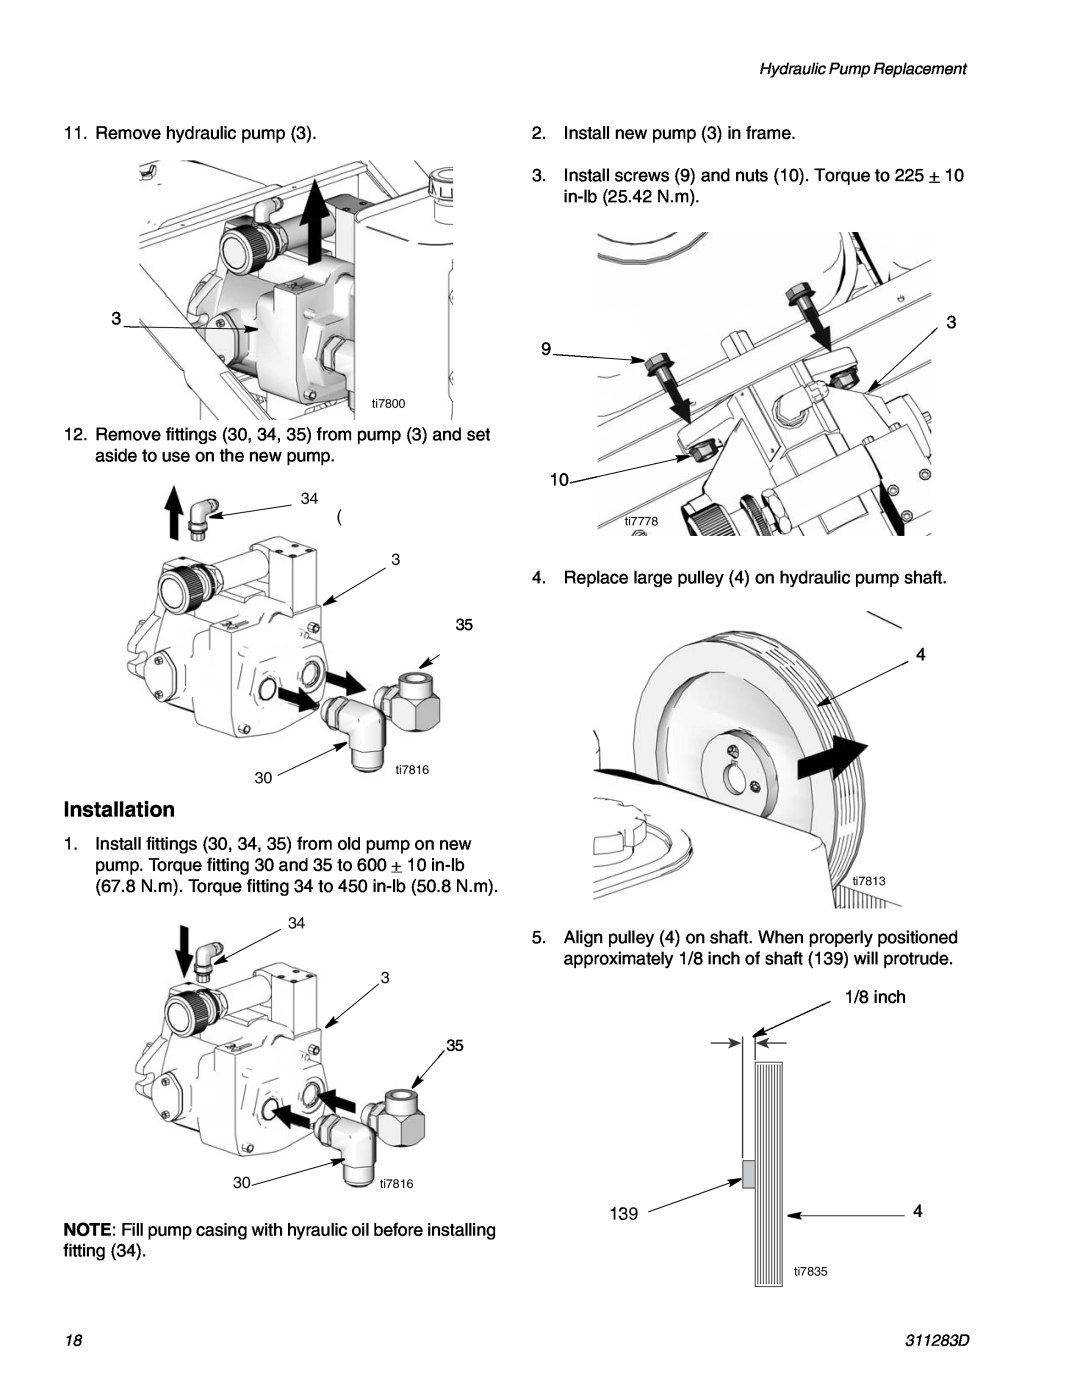 Graco Inc 311283D, 249318, 253472, 253471, 249617 important safety instructions Installation, Remove hydraulic pump 